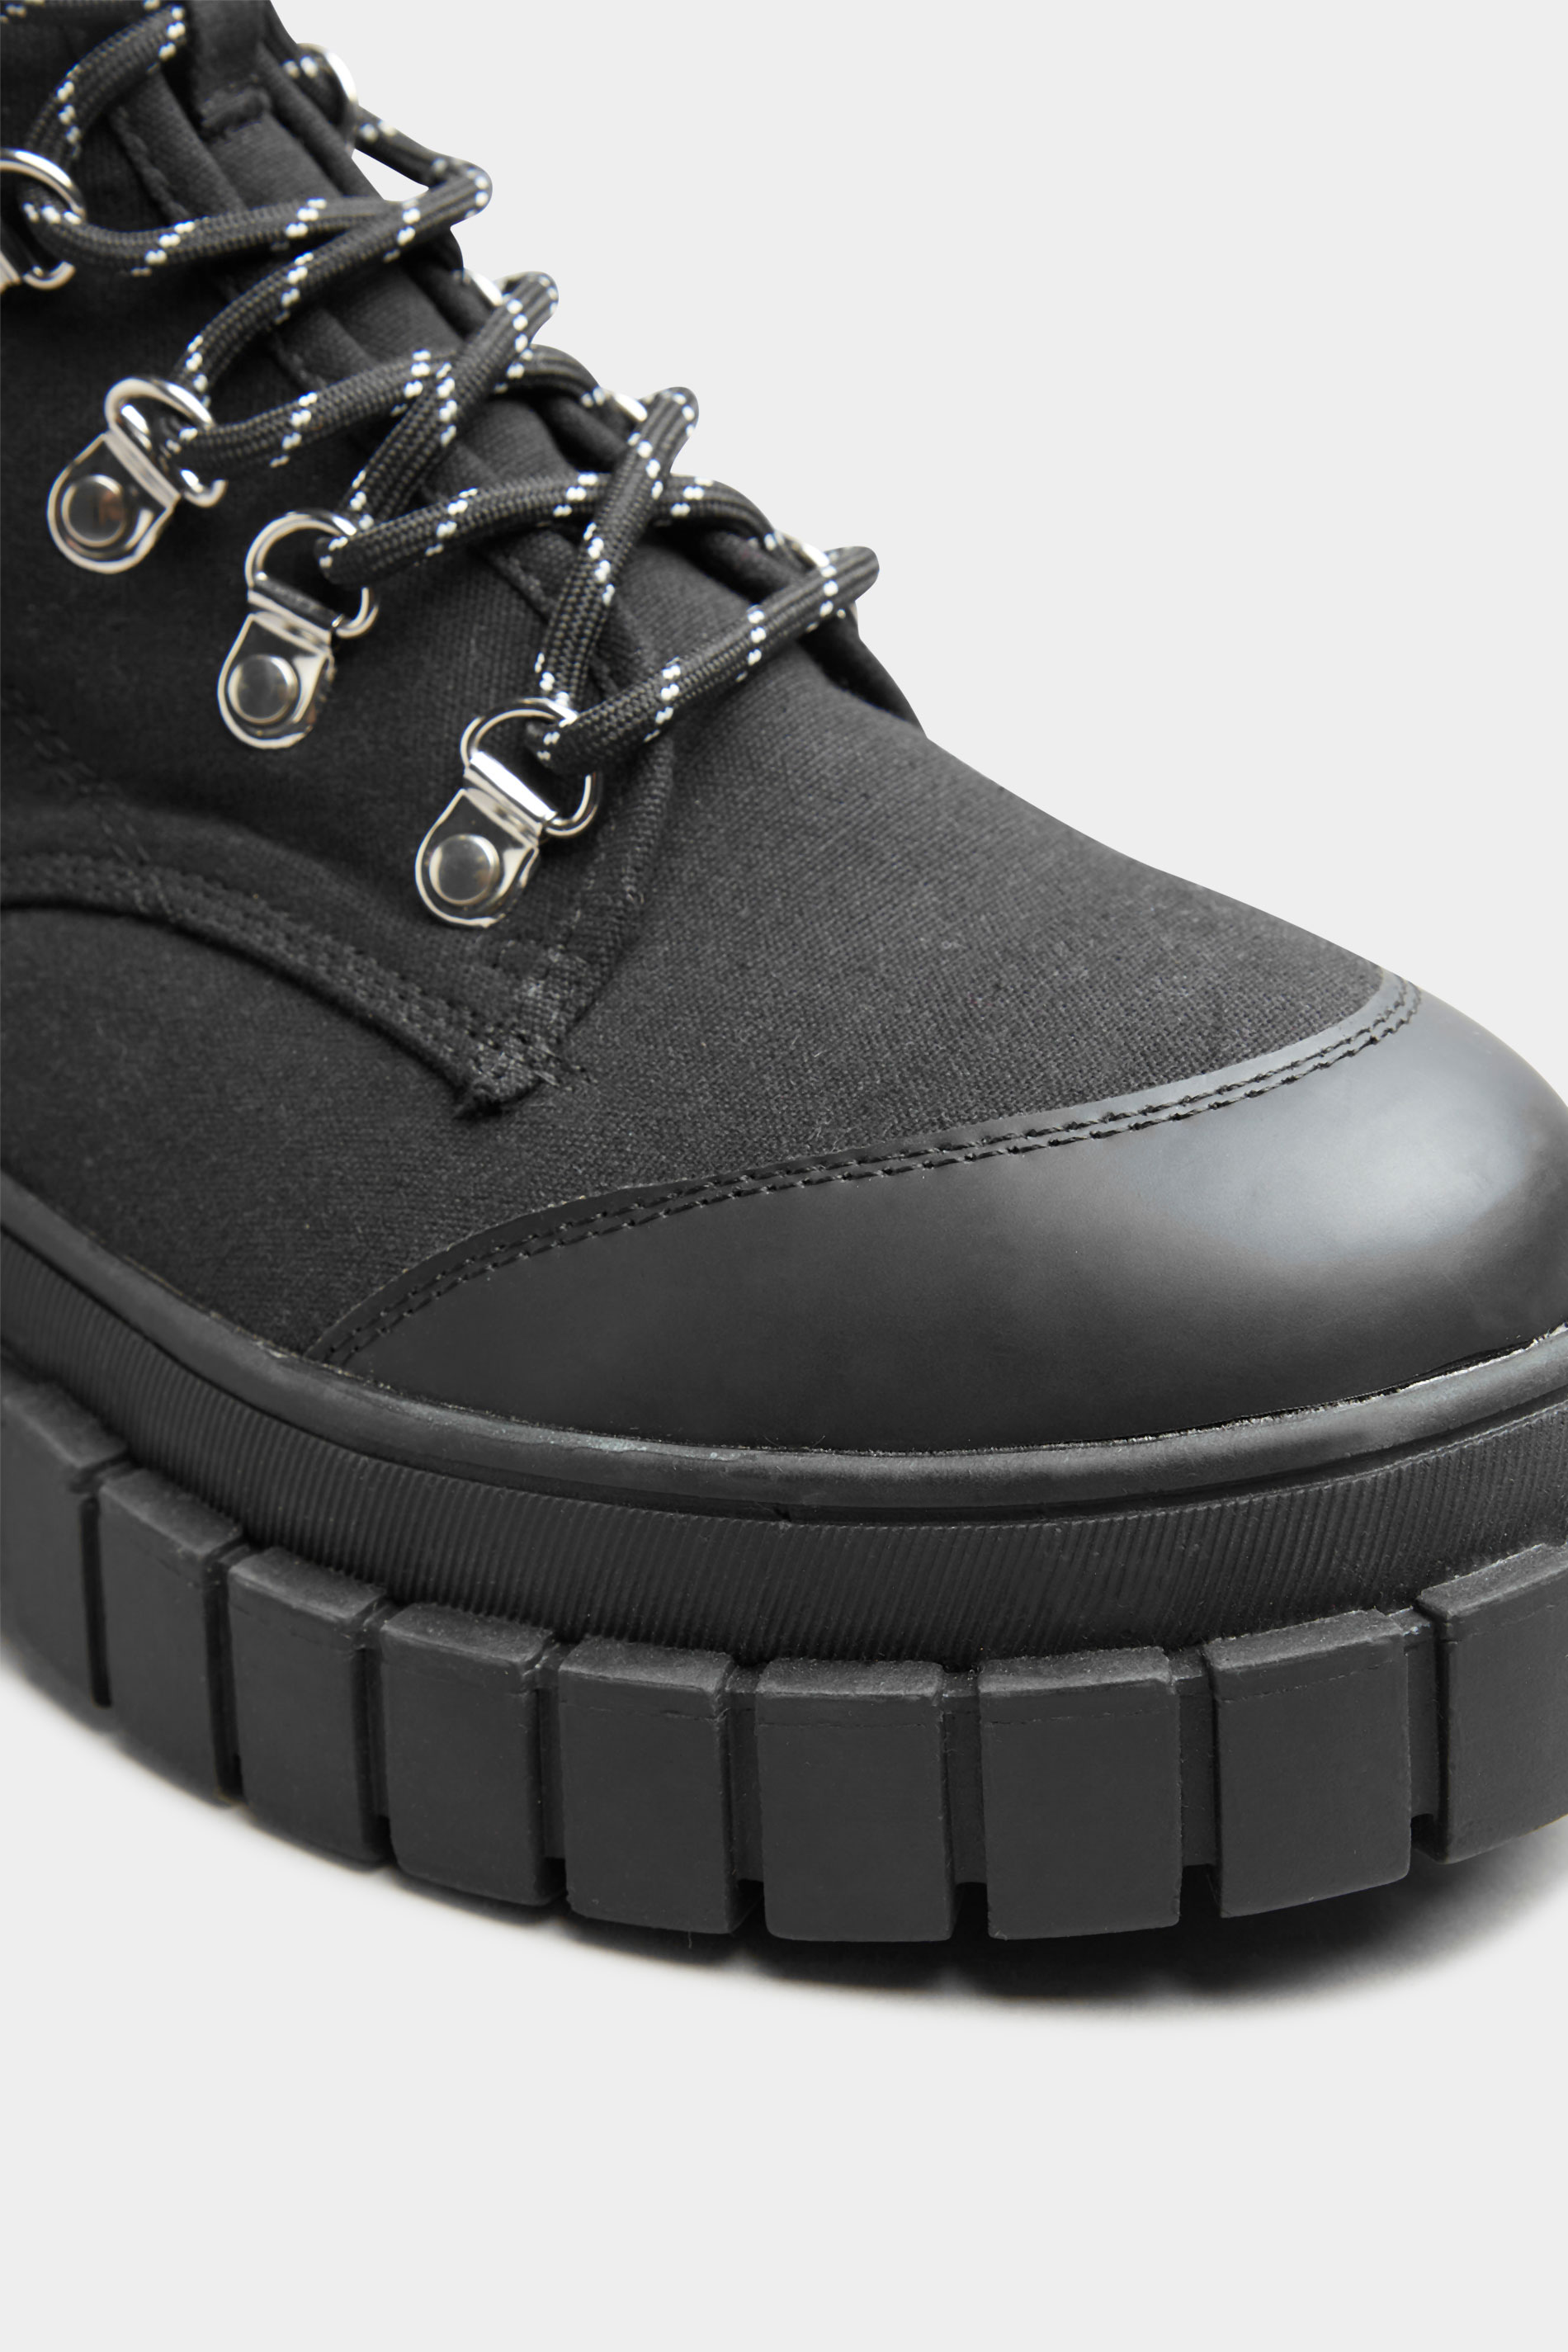 LIMITED COLLECTION Black Canvas Chunky Combat Boots In Wide Fit | Yours Clothing 3